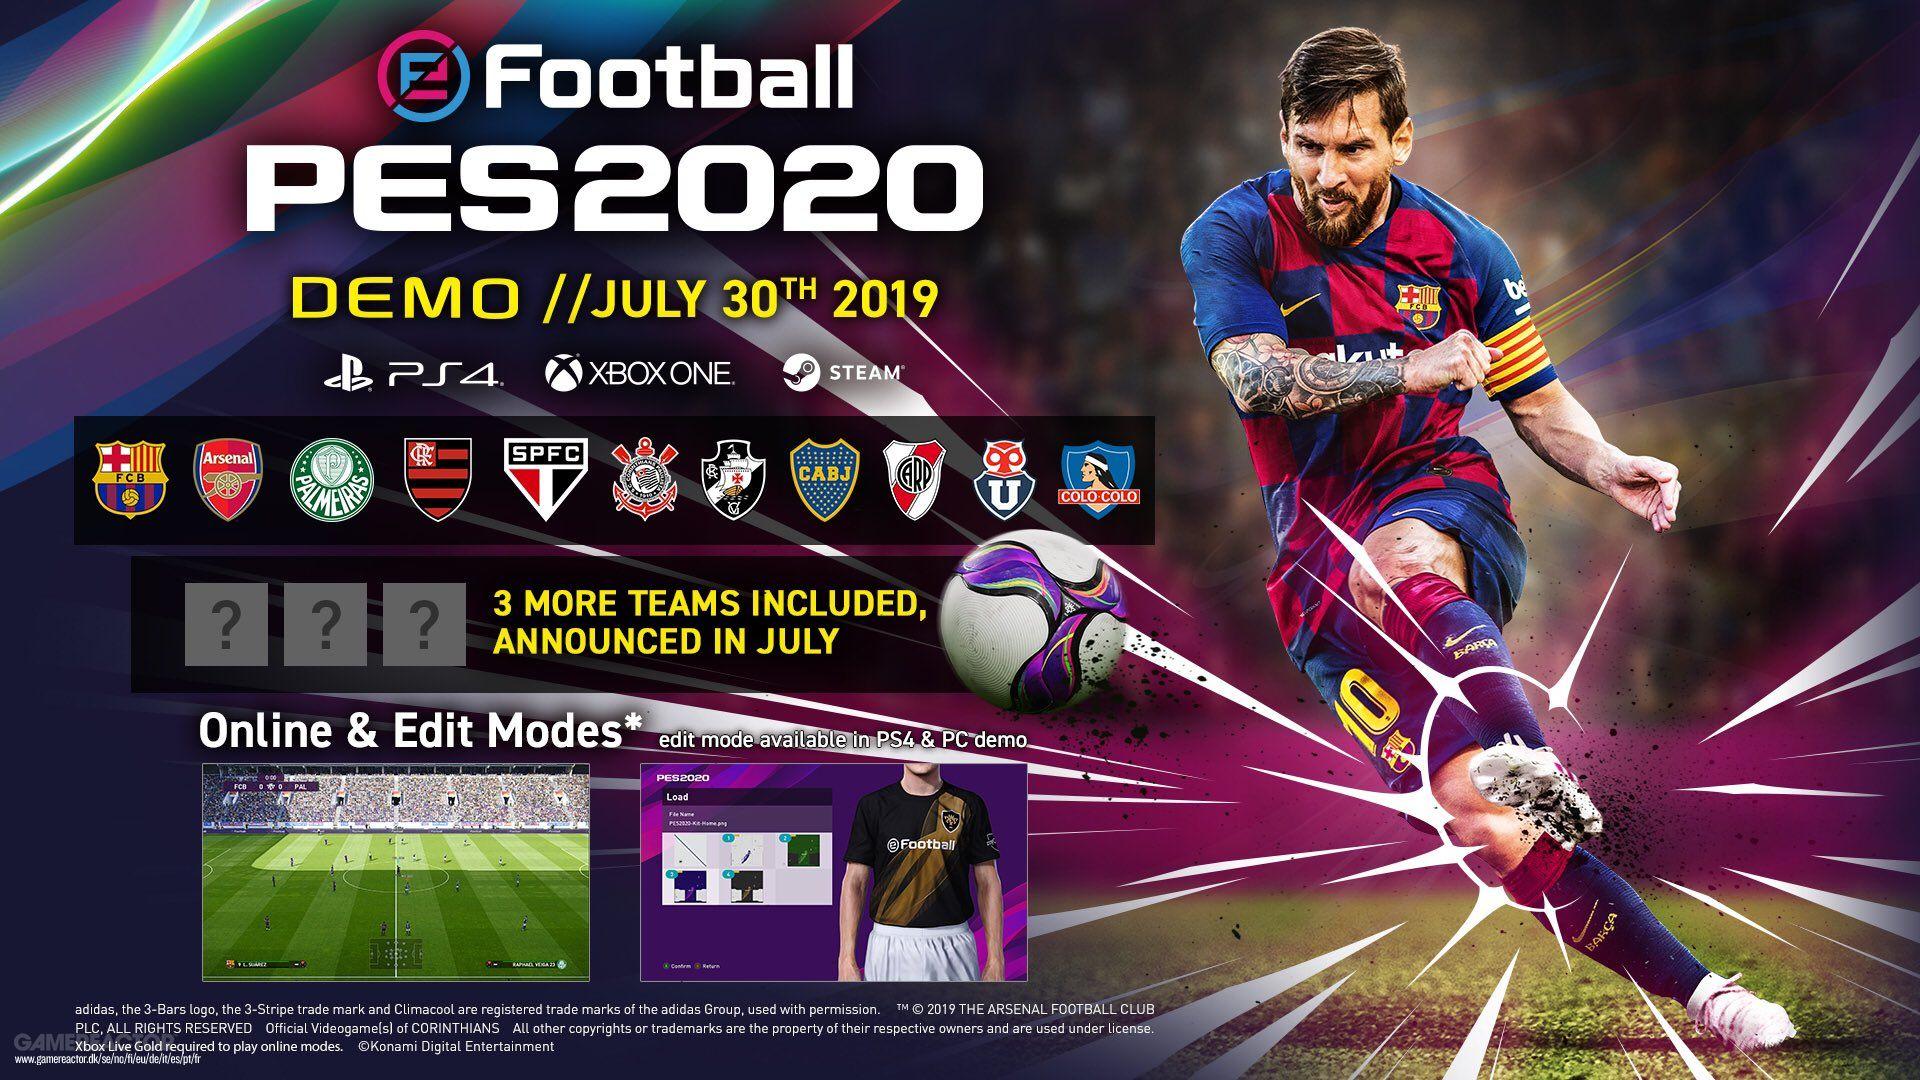 eFootball PES 2020 Demo includes Edit Mode and 14 real teams